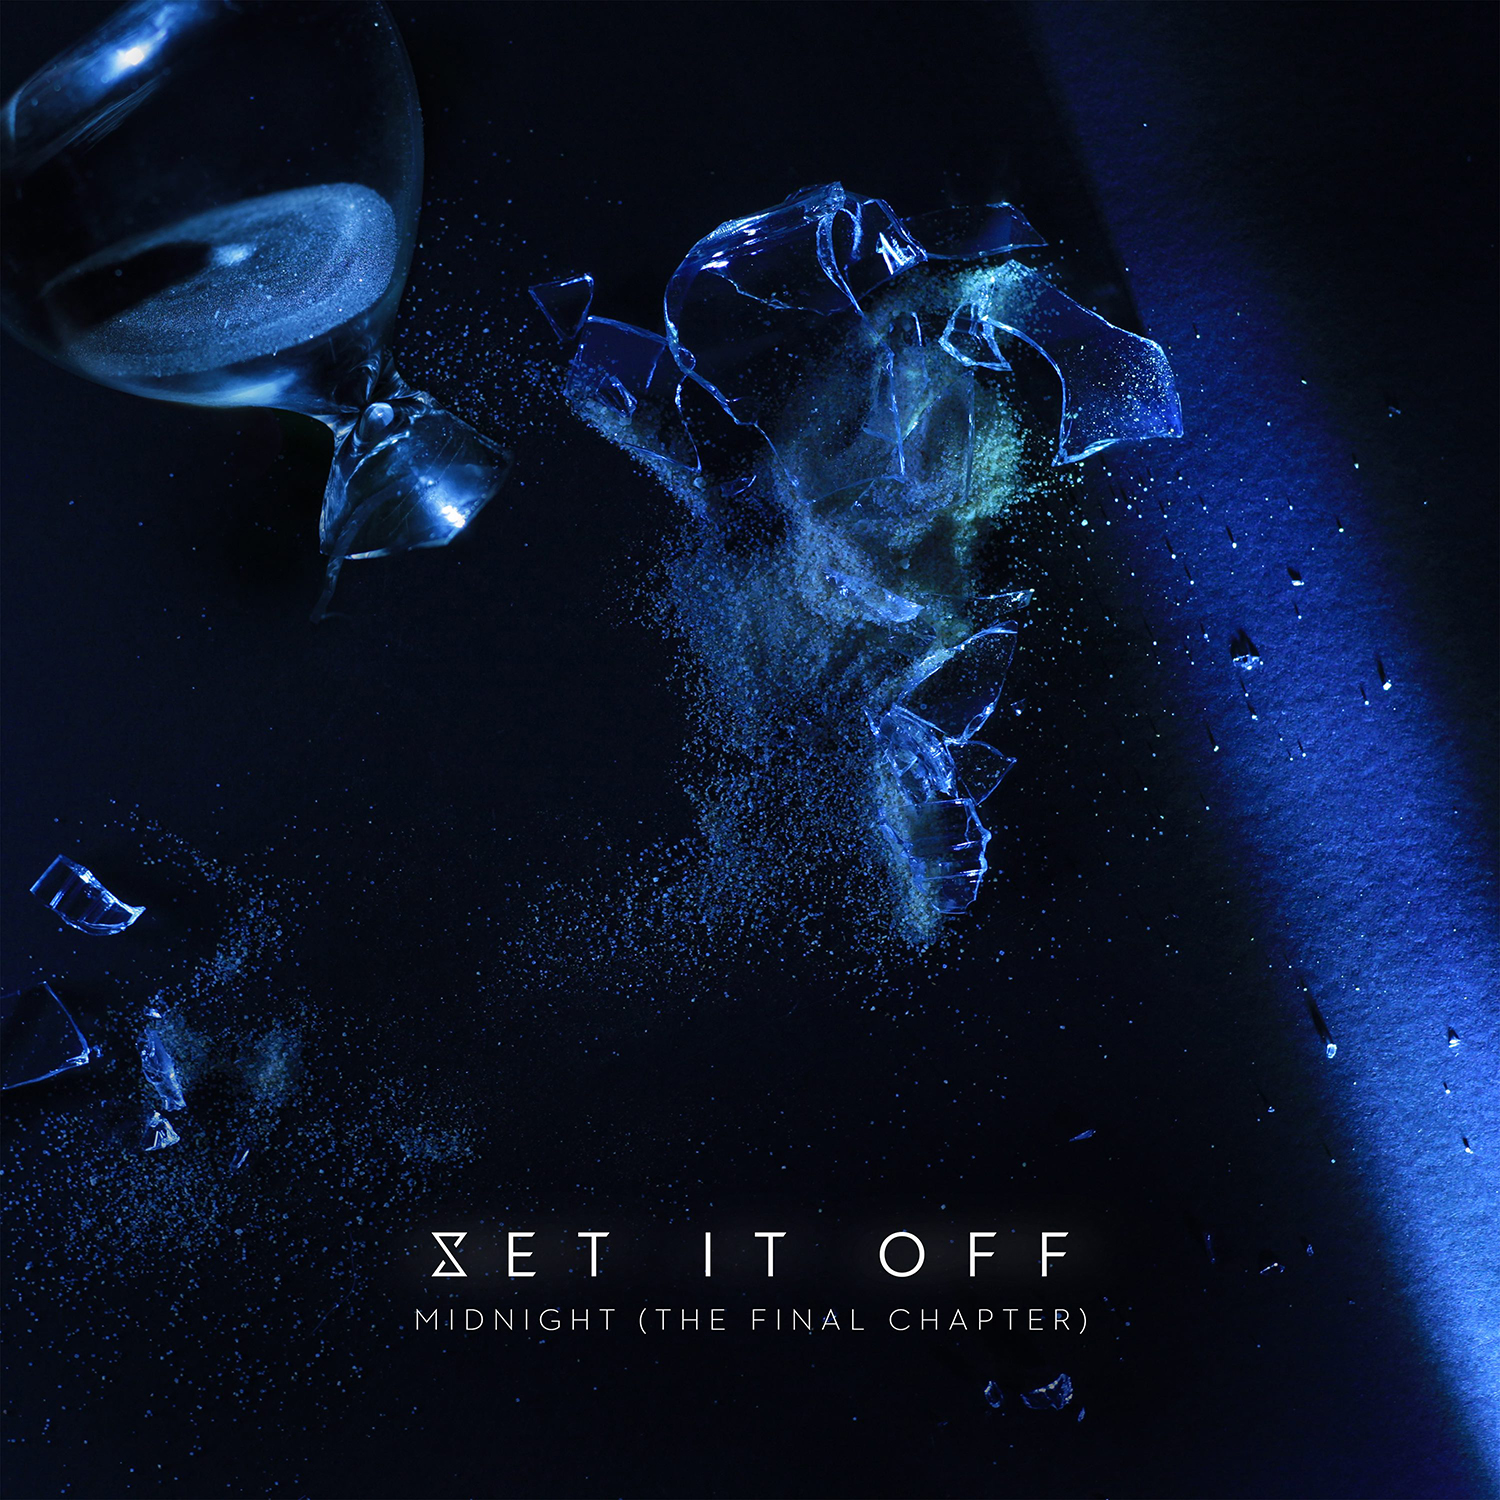 ALBUM REVIEW: Midnight (The Final Chapter) - Set It Off